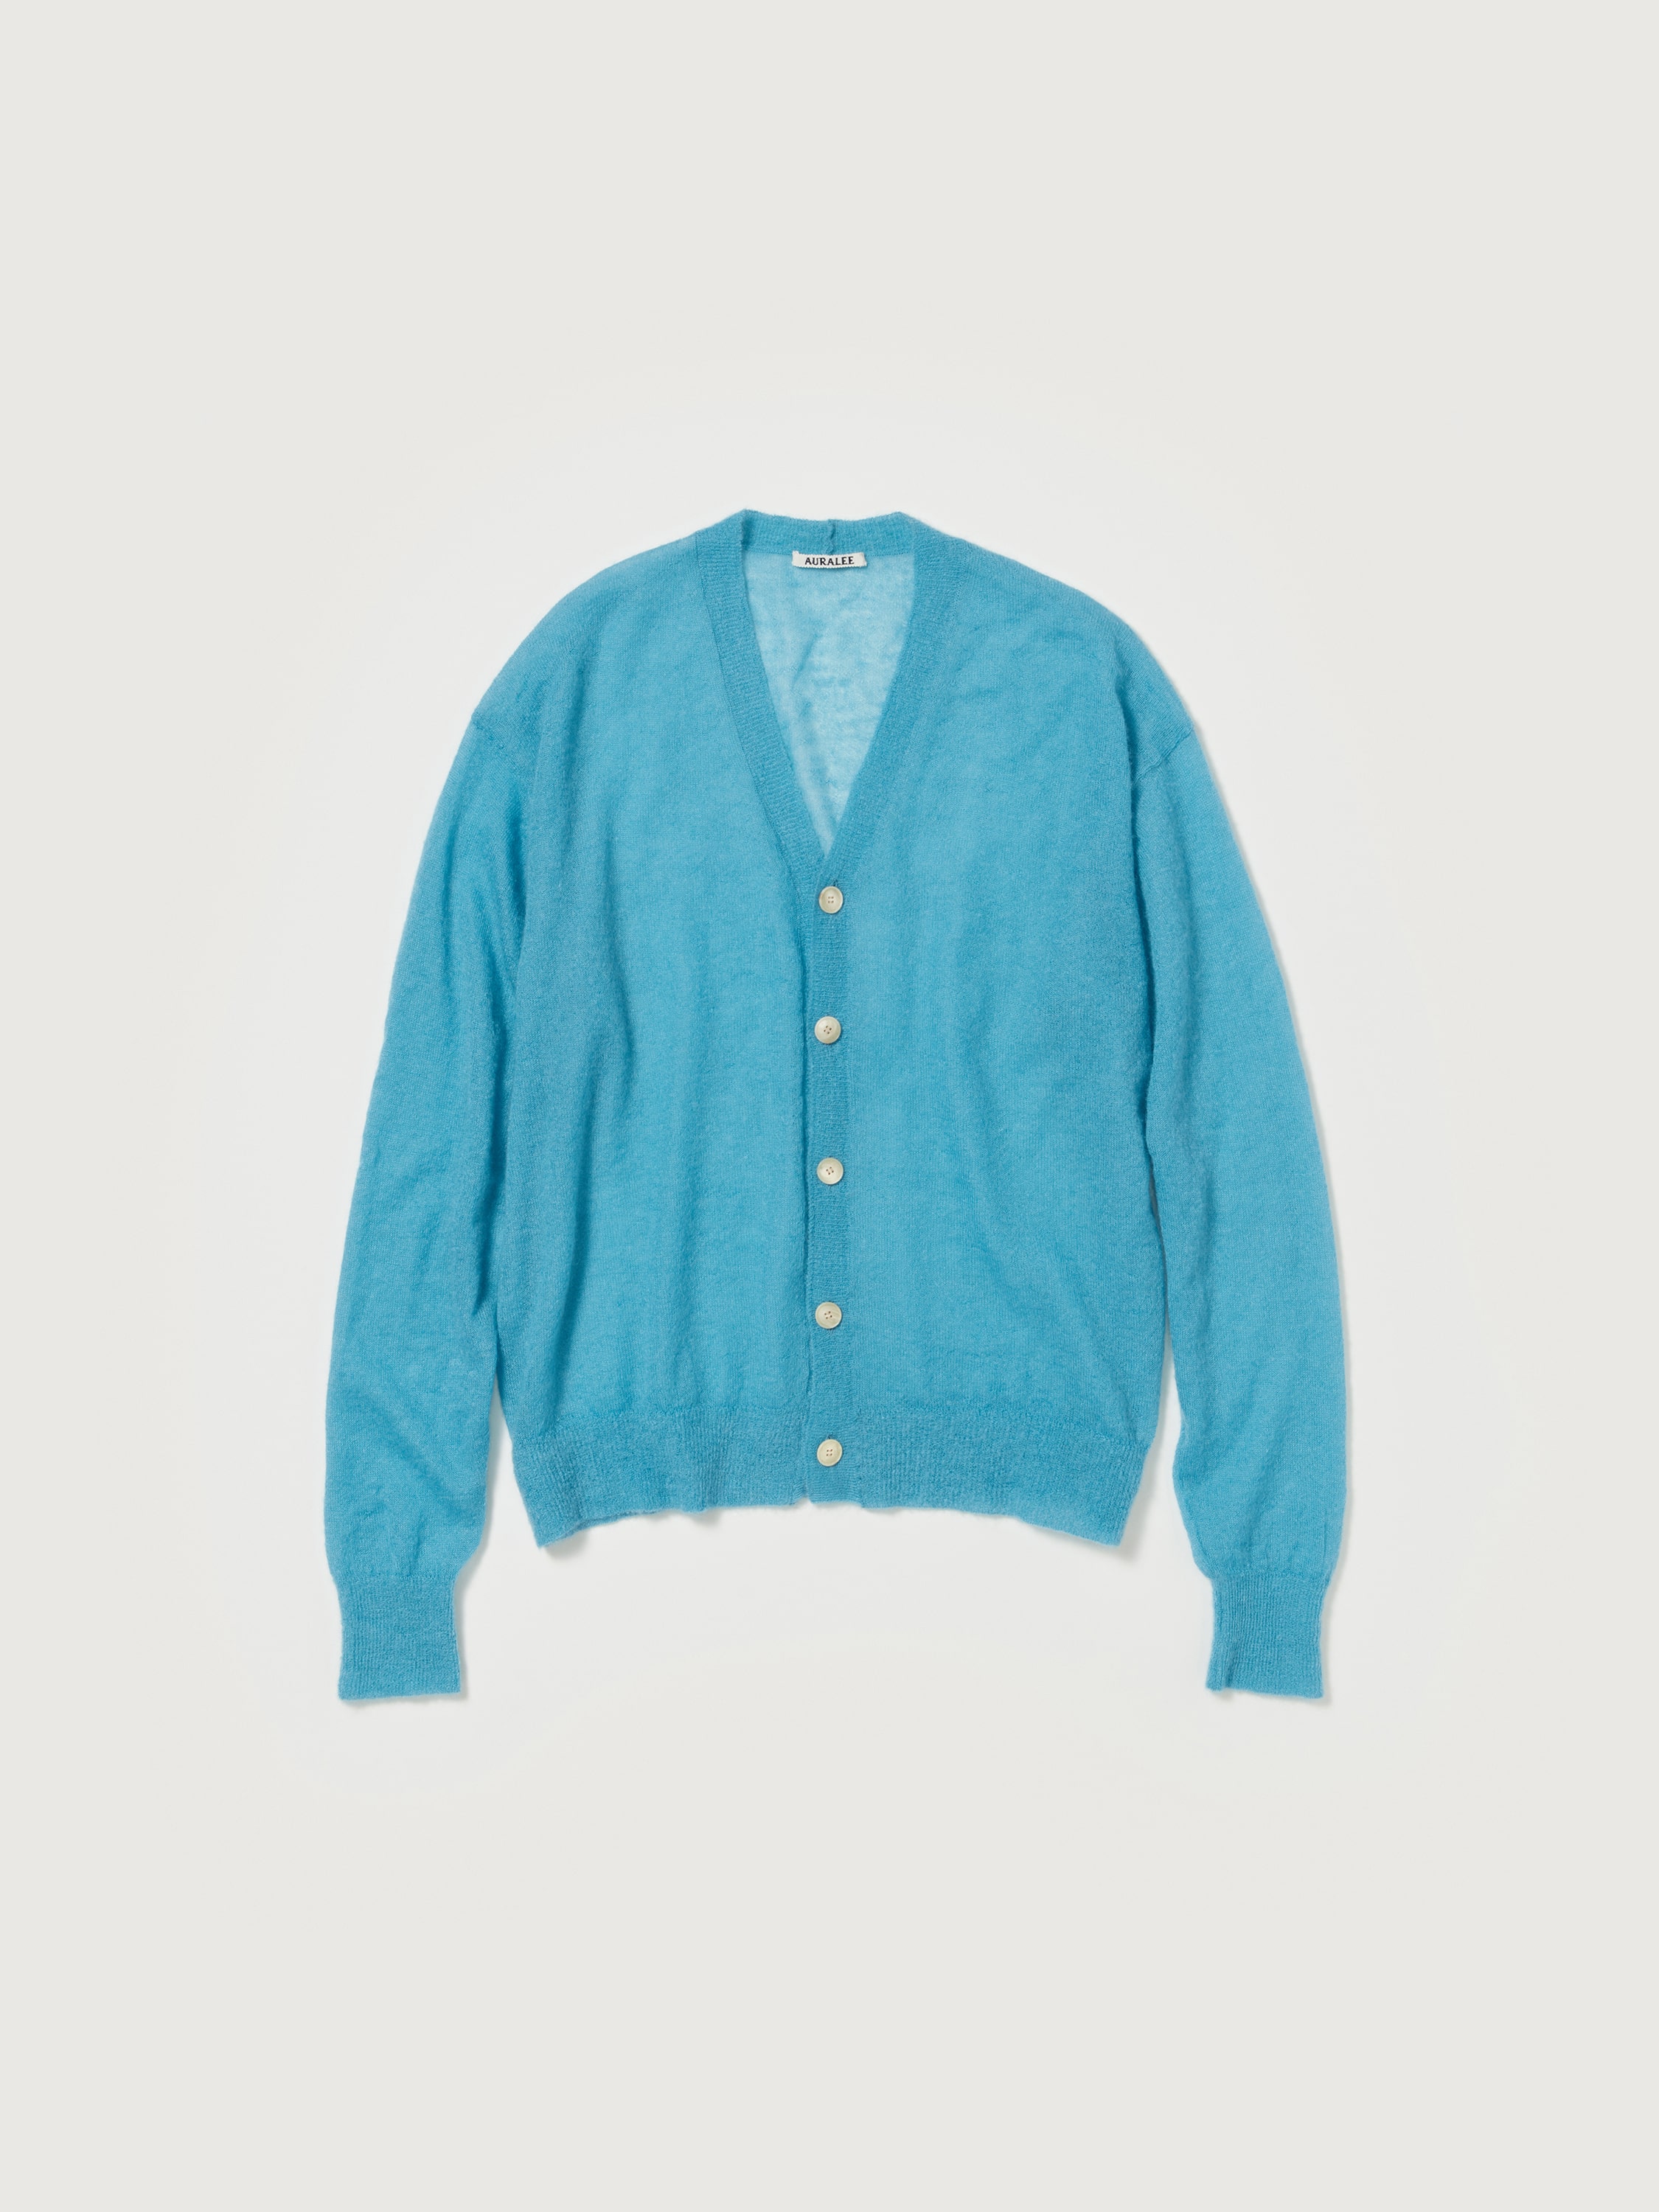 KID MOHAIR SHEER KNIT CARDIGAN 詳細画像 TURQUOISE BLUE 5